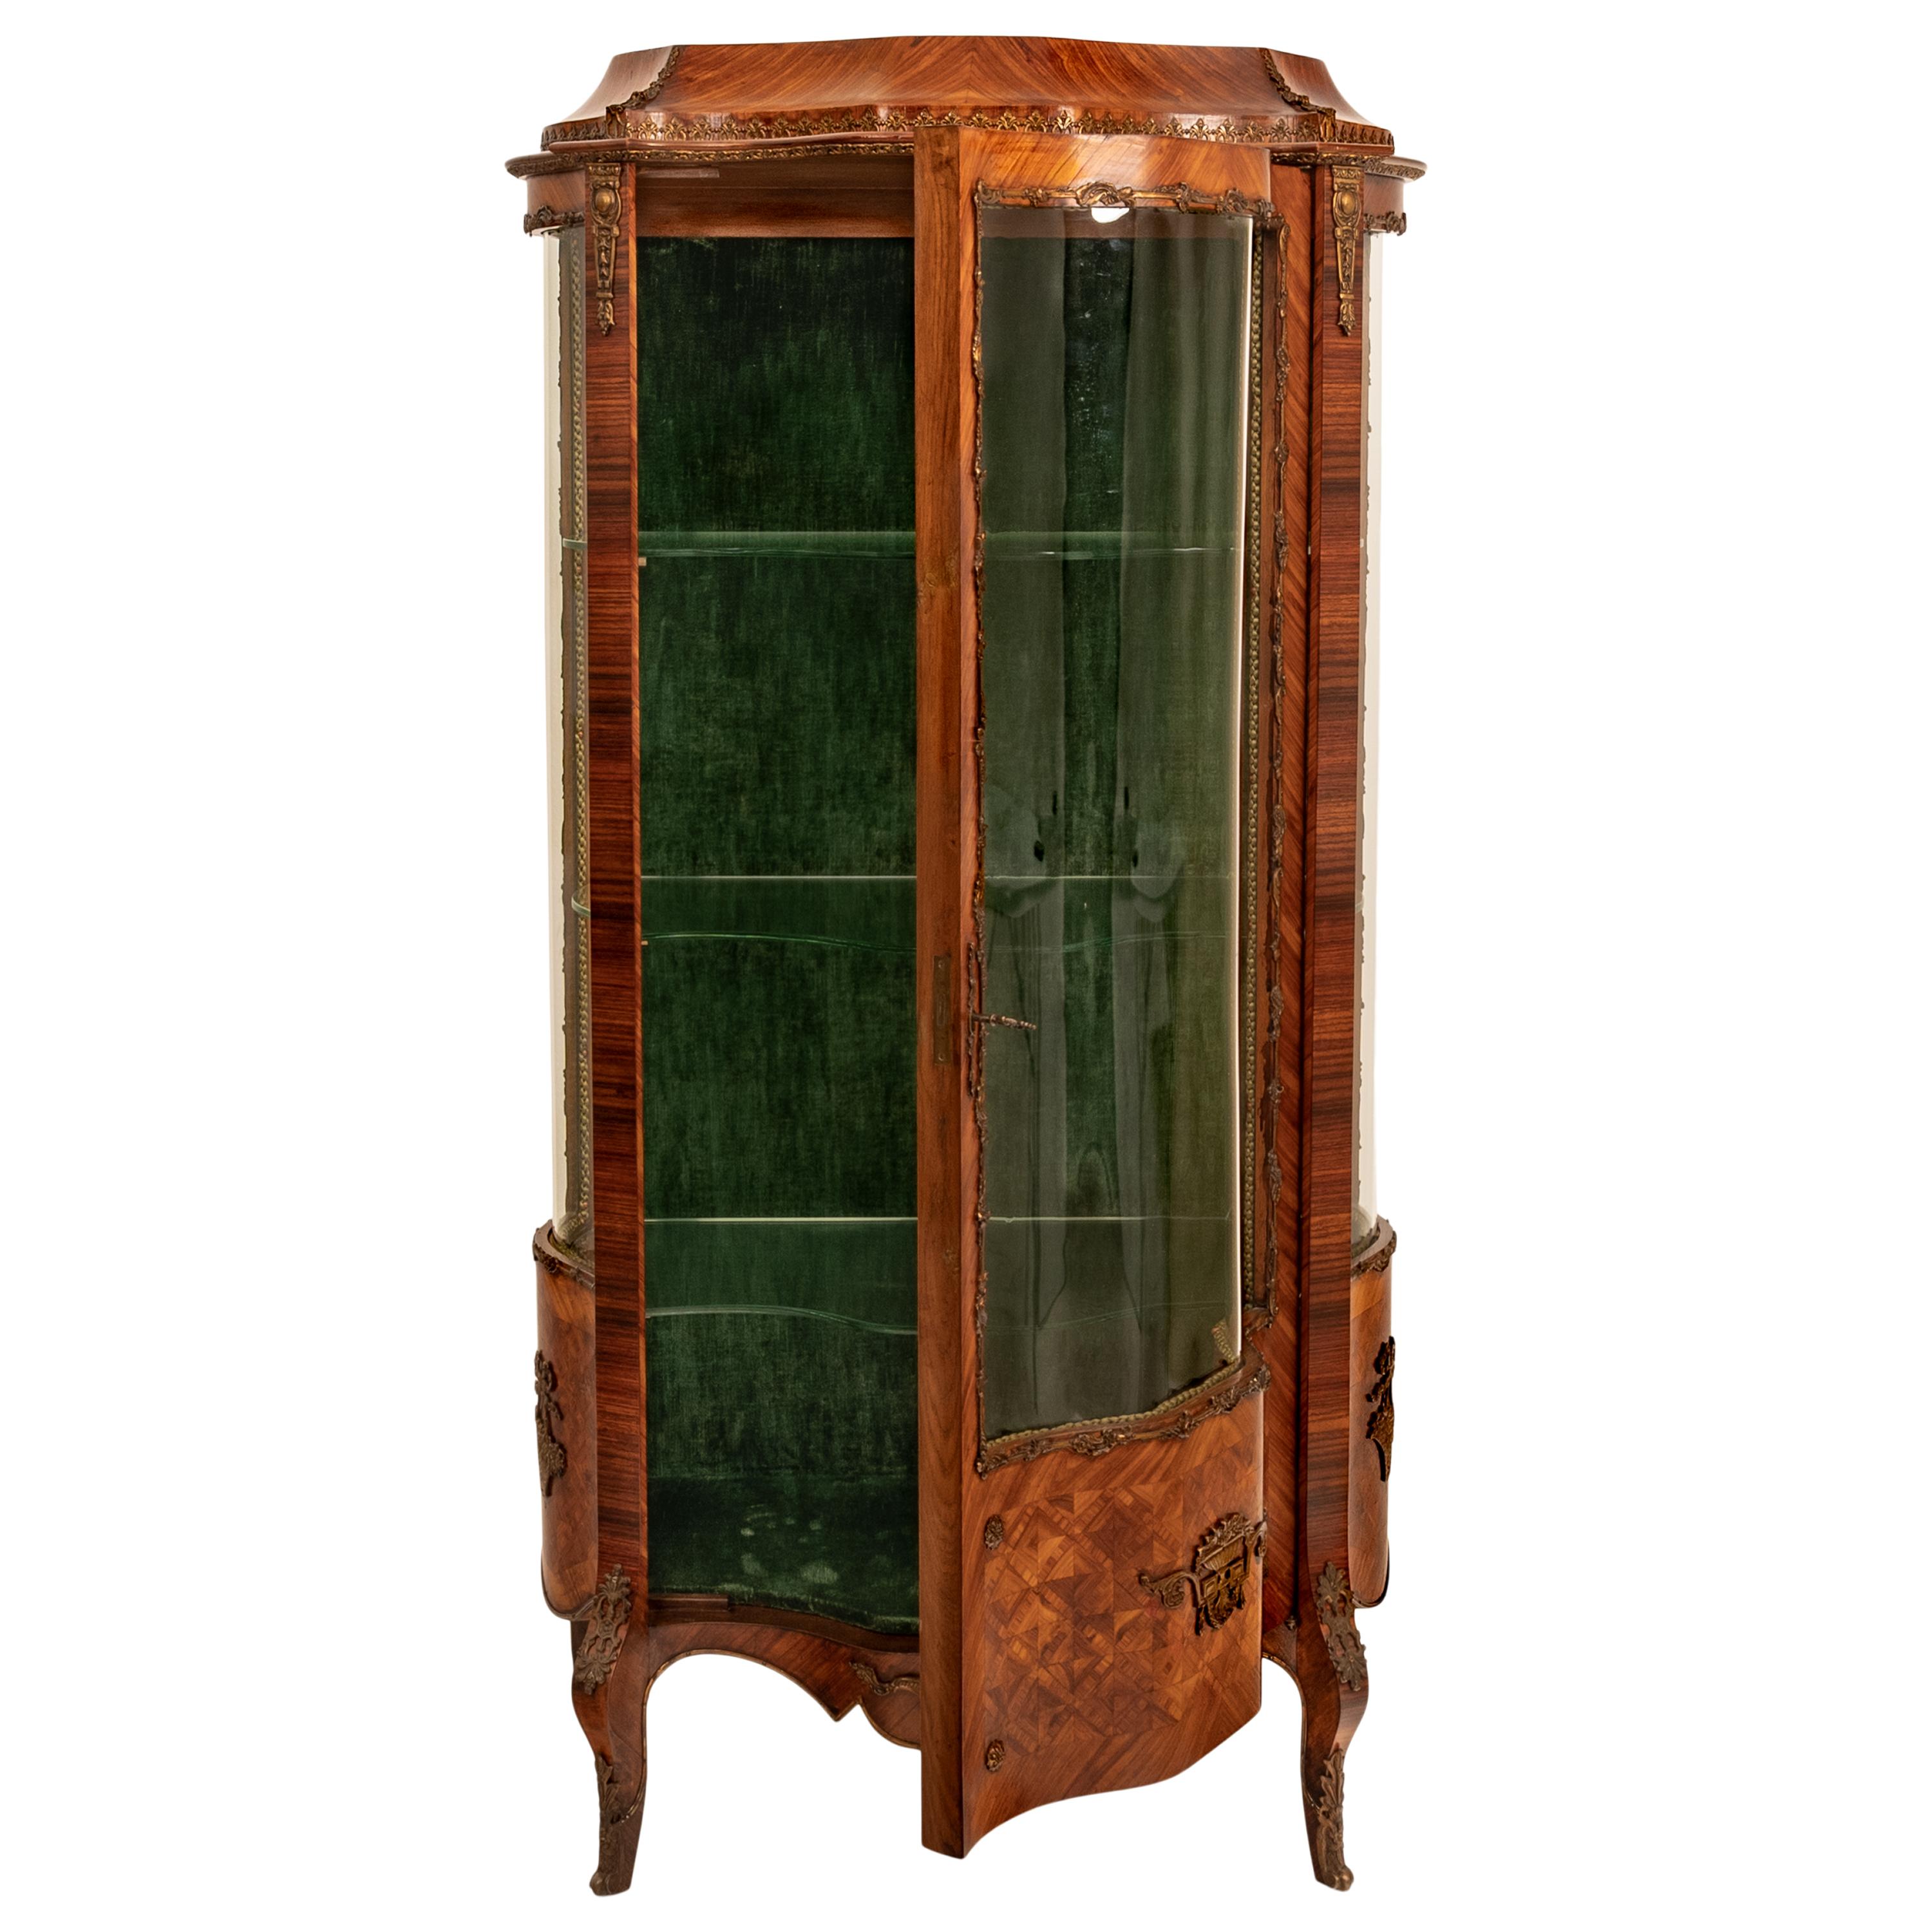 Fine Antique French Louis XV Kingwood Ormolu Bombe Shaped Marquetry Vitrine 1880 For Sale 4